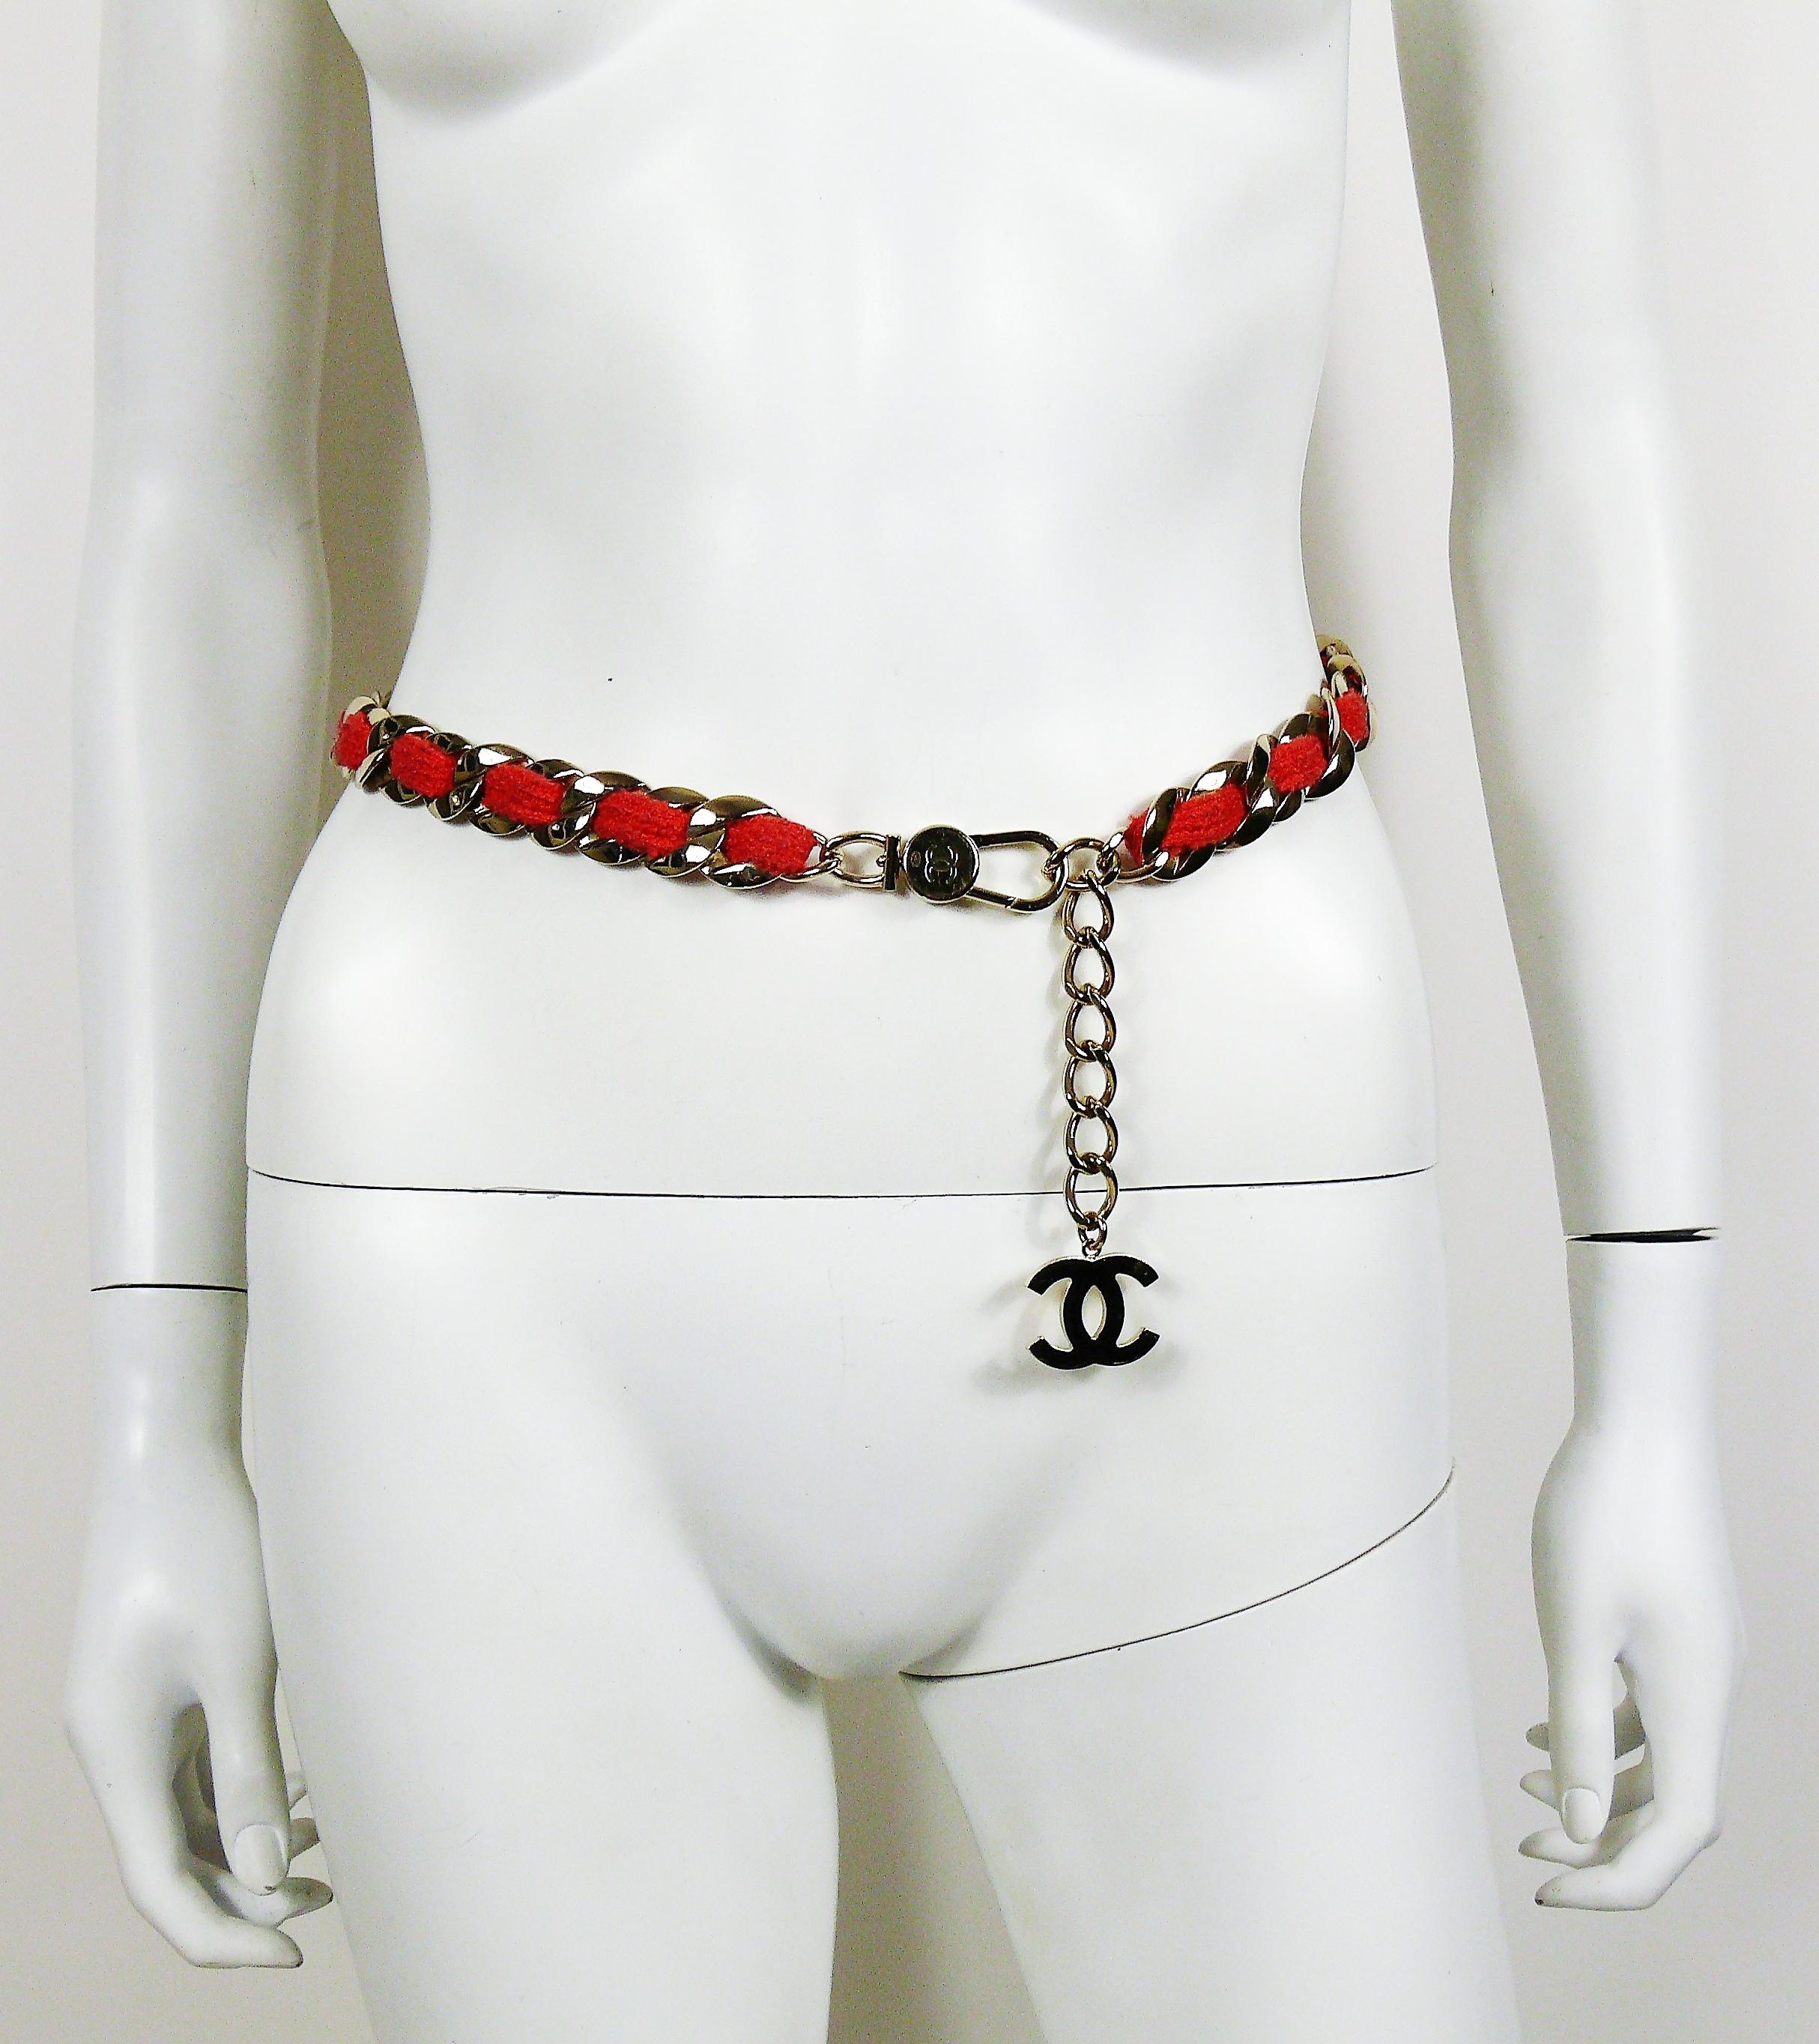 CHANEL light gold toned chunky chain belt with intertwined coral tweed strap and CC logo drop at the end.

Front the Cruise 2008 Collection.

Designed as a belt, but can also be worn as a necklace.

Adjustable length.

Marked CHANEL 08 C Made in